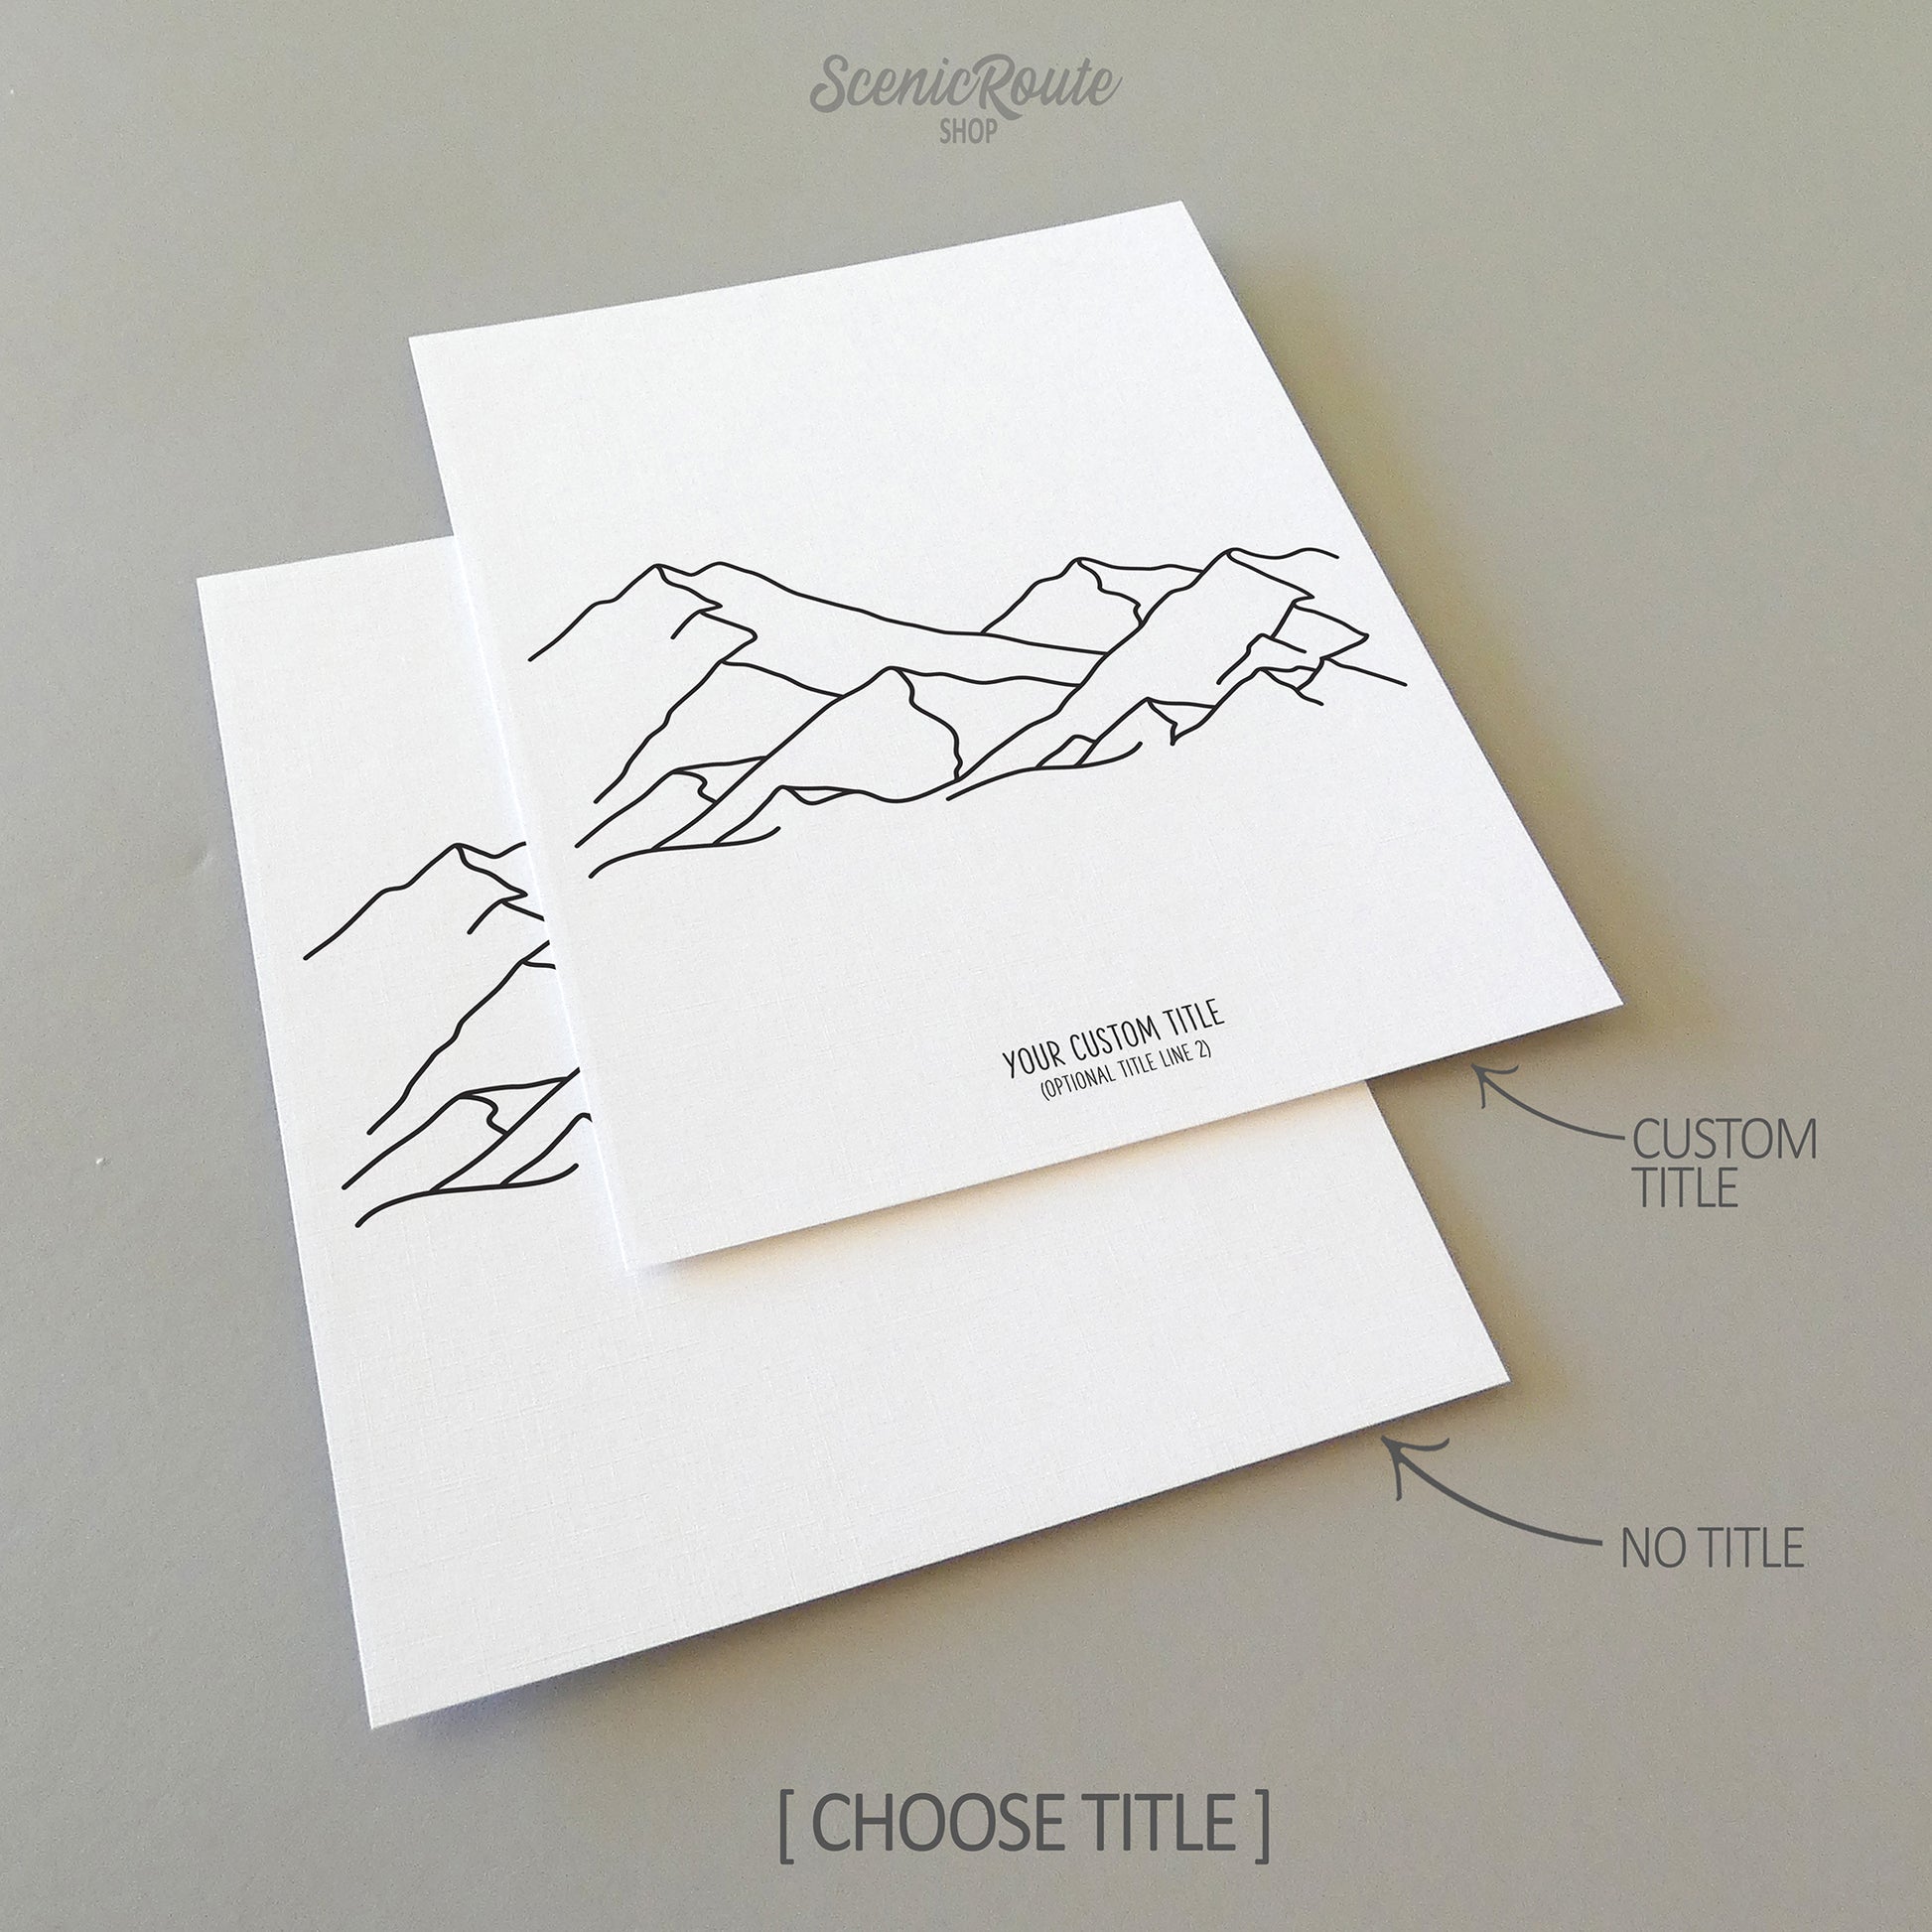 Two line art drawings of a mountain range on white linen paper with a gray background.  The pieces are shown with “No Title” and “Custom Title” options for the available art print options.